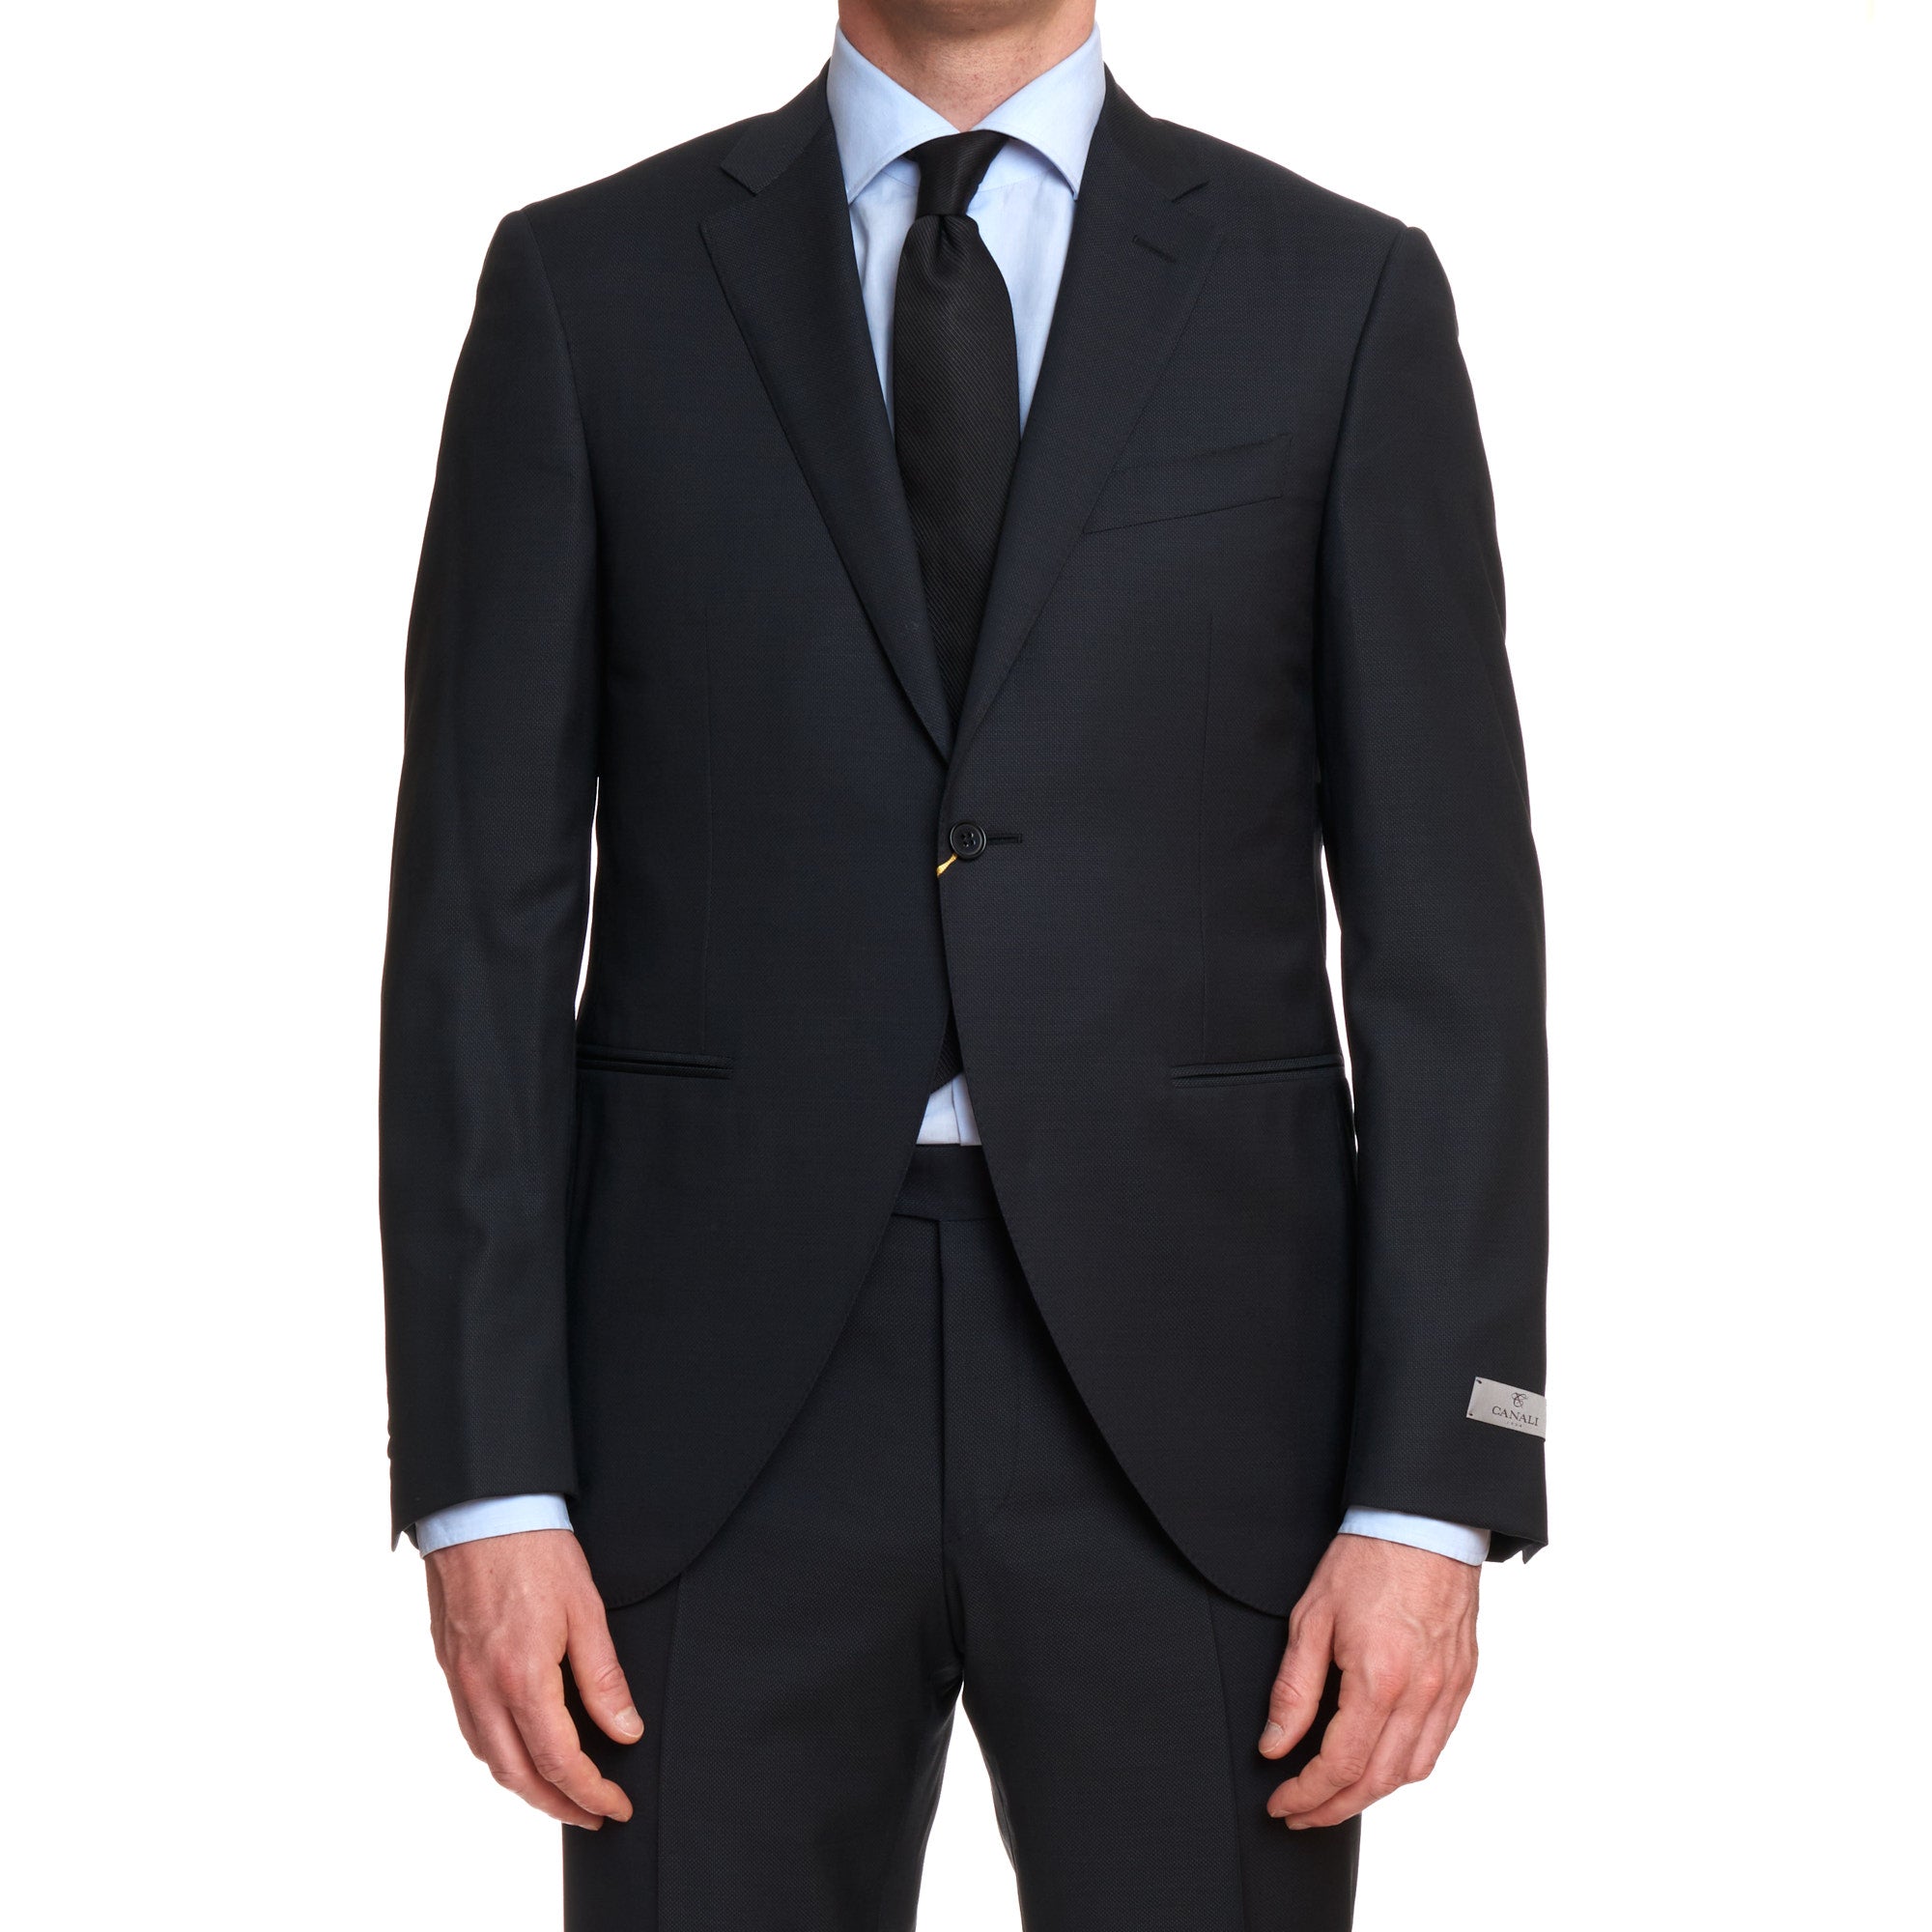 CANALI 1934 Dark Gray Travel Water Resistant Wool 1 Button Suit EU 50 US 40 Slim Fit CANALI